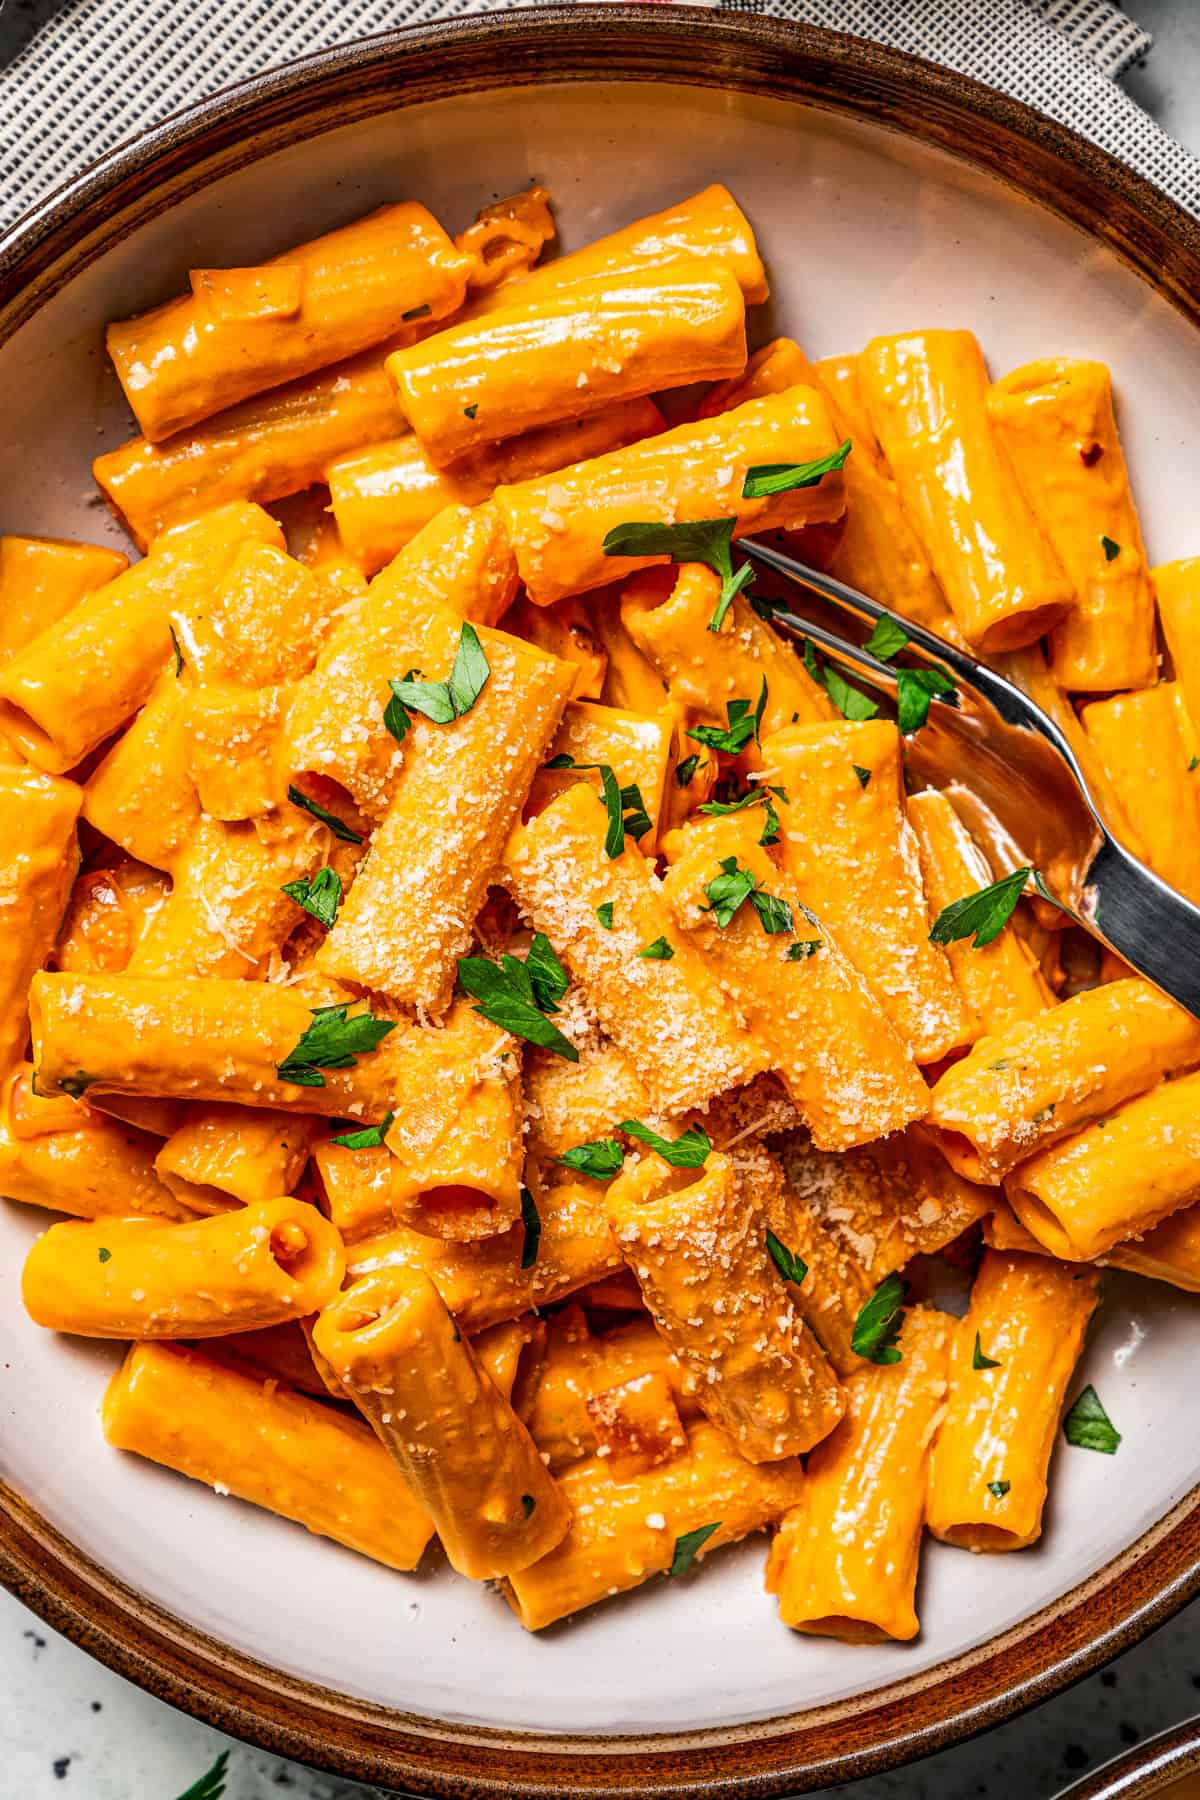 Rigatoni pasta served in a bowl with a fork.